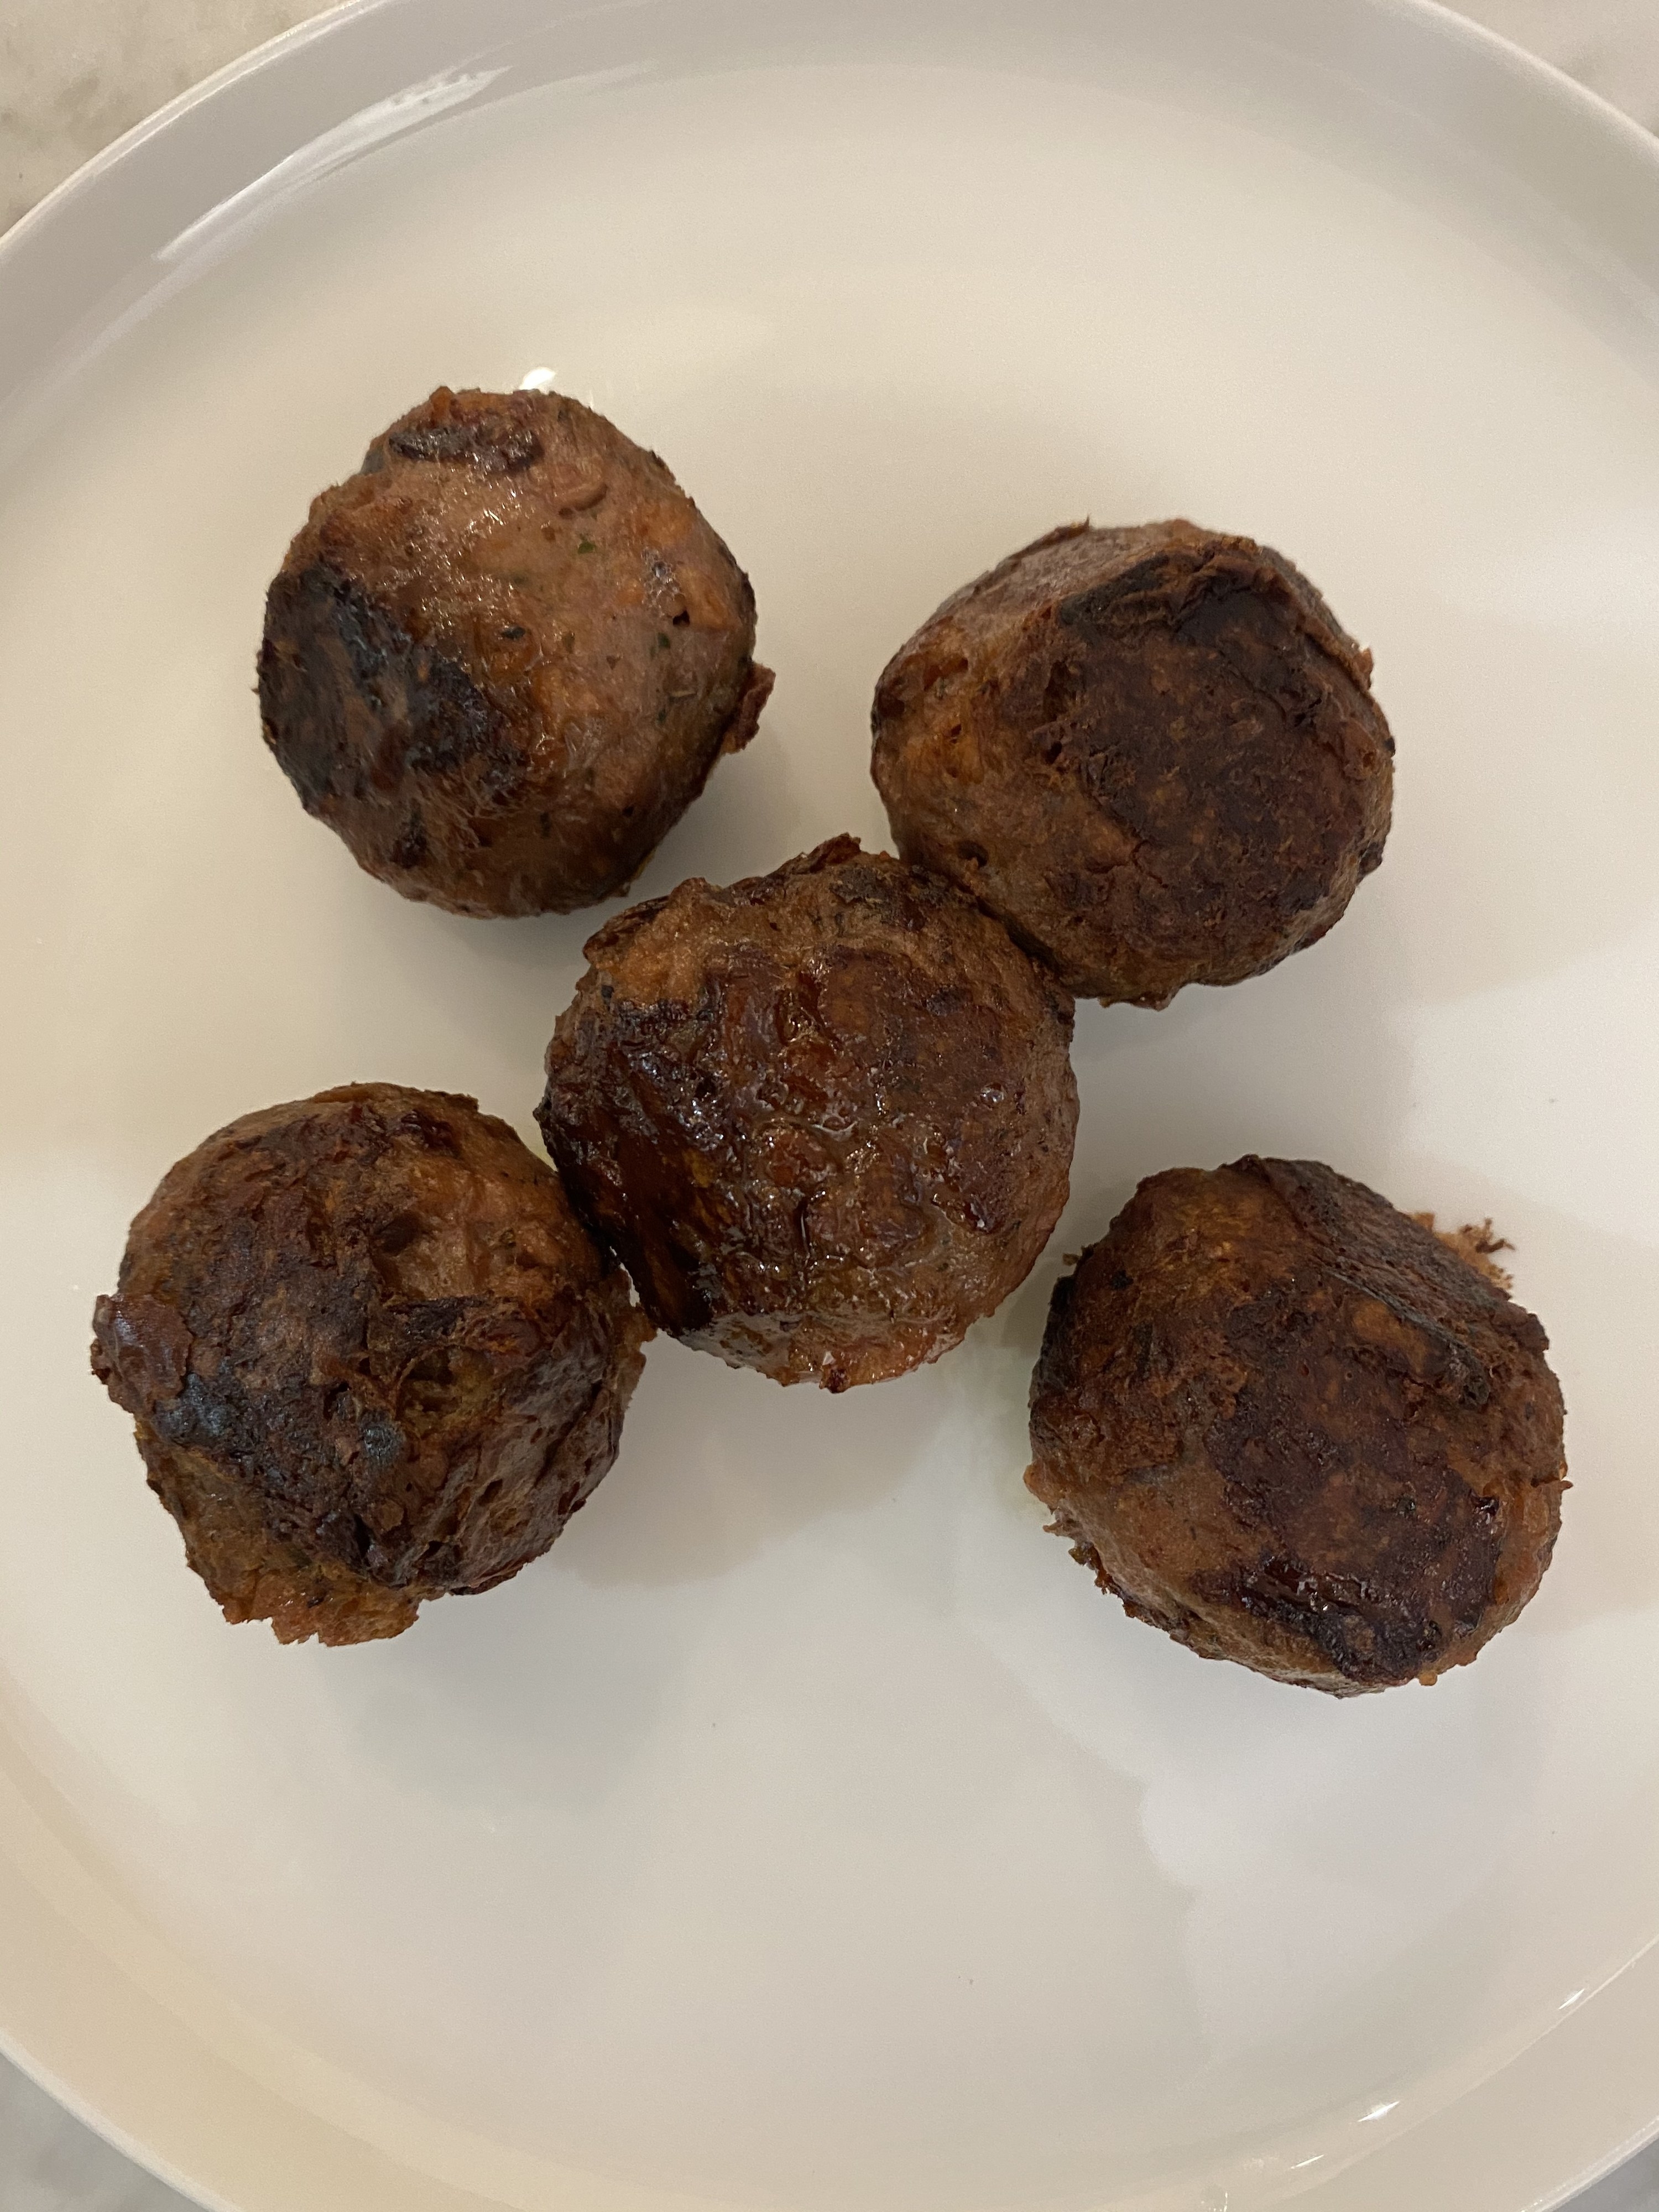 Five cooked Beyond Meat meatballs on a white plate.